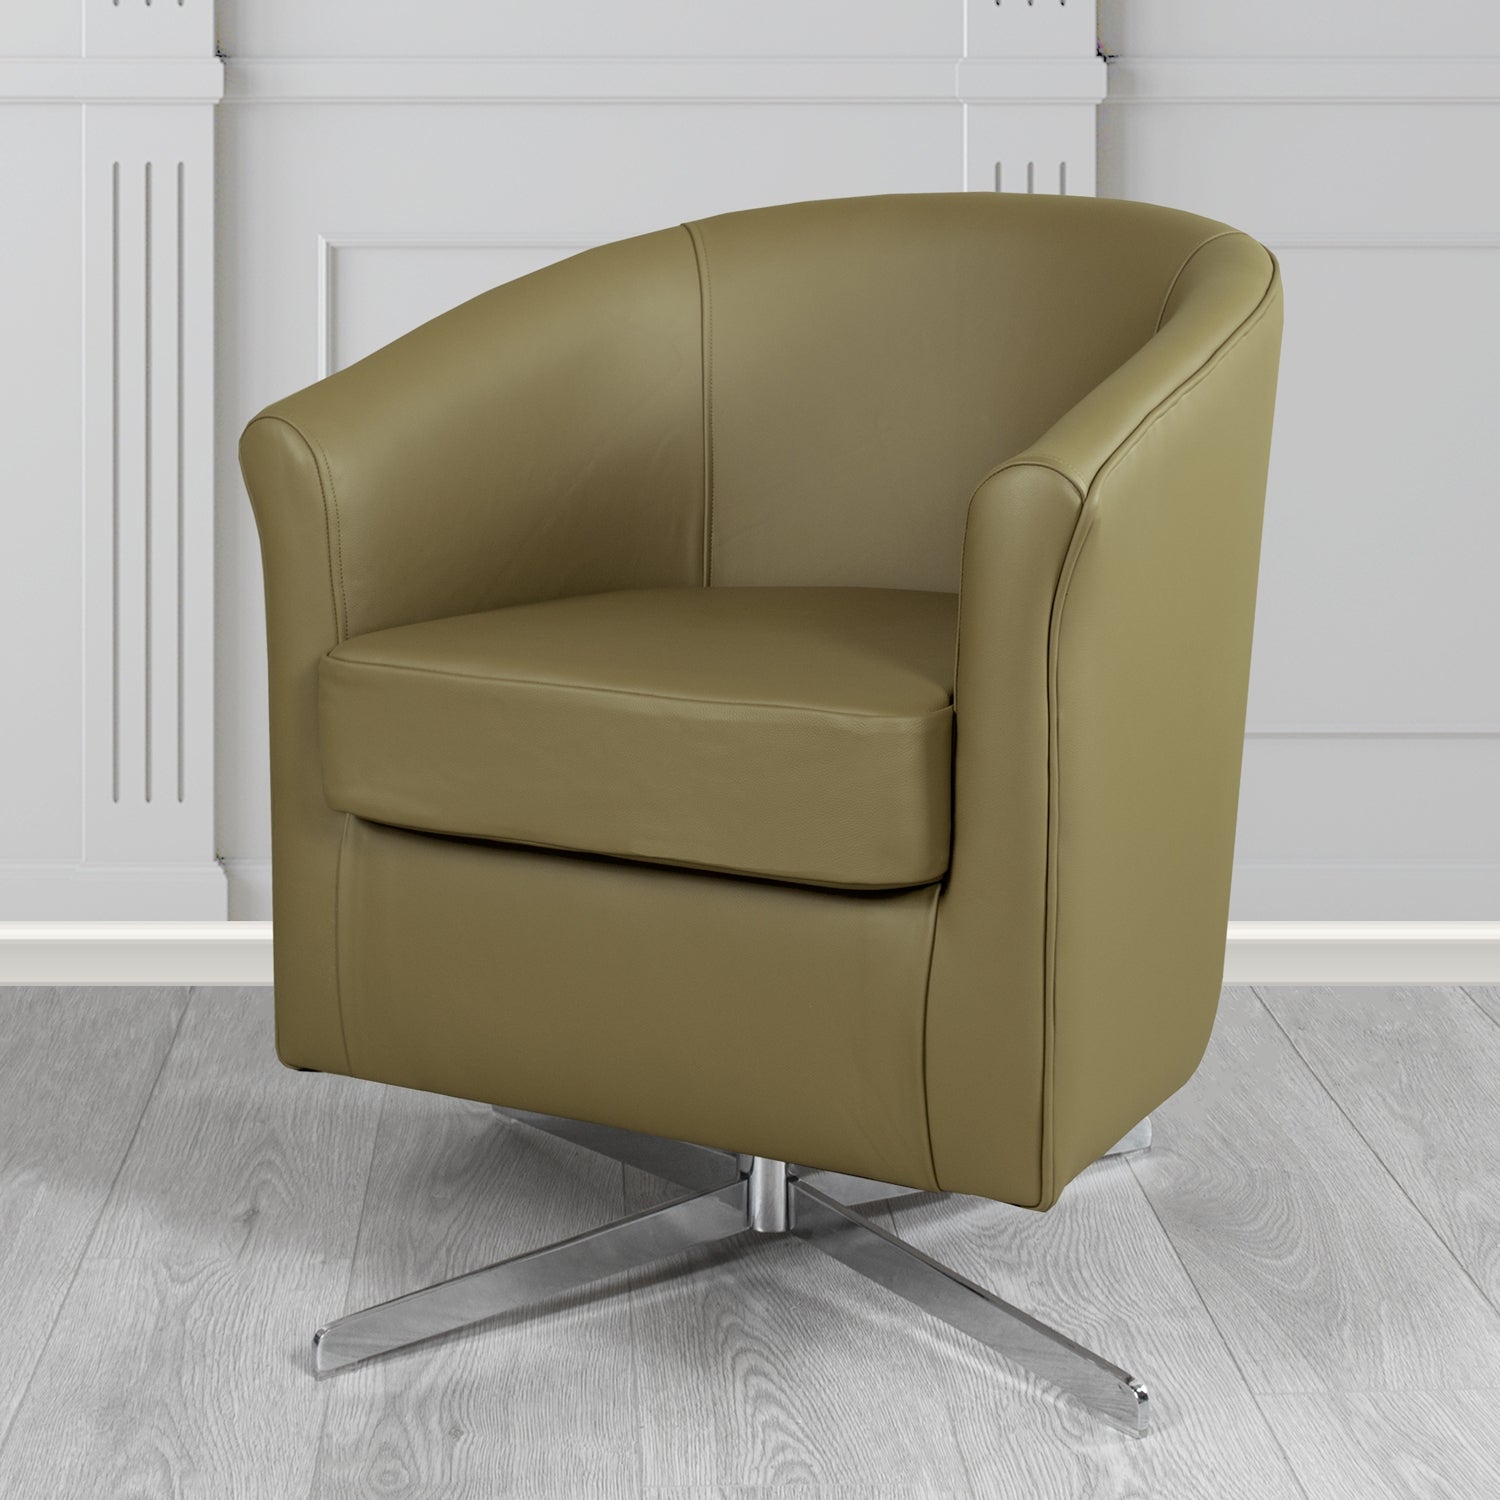 Cannes Swivel Tub Chair in Shelly Sage Crib 5 Genuine Leather - The Tub Chair Shop